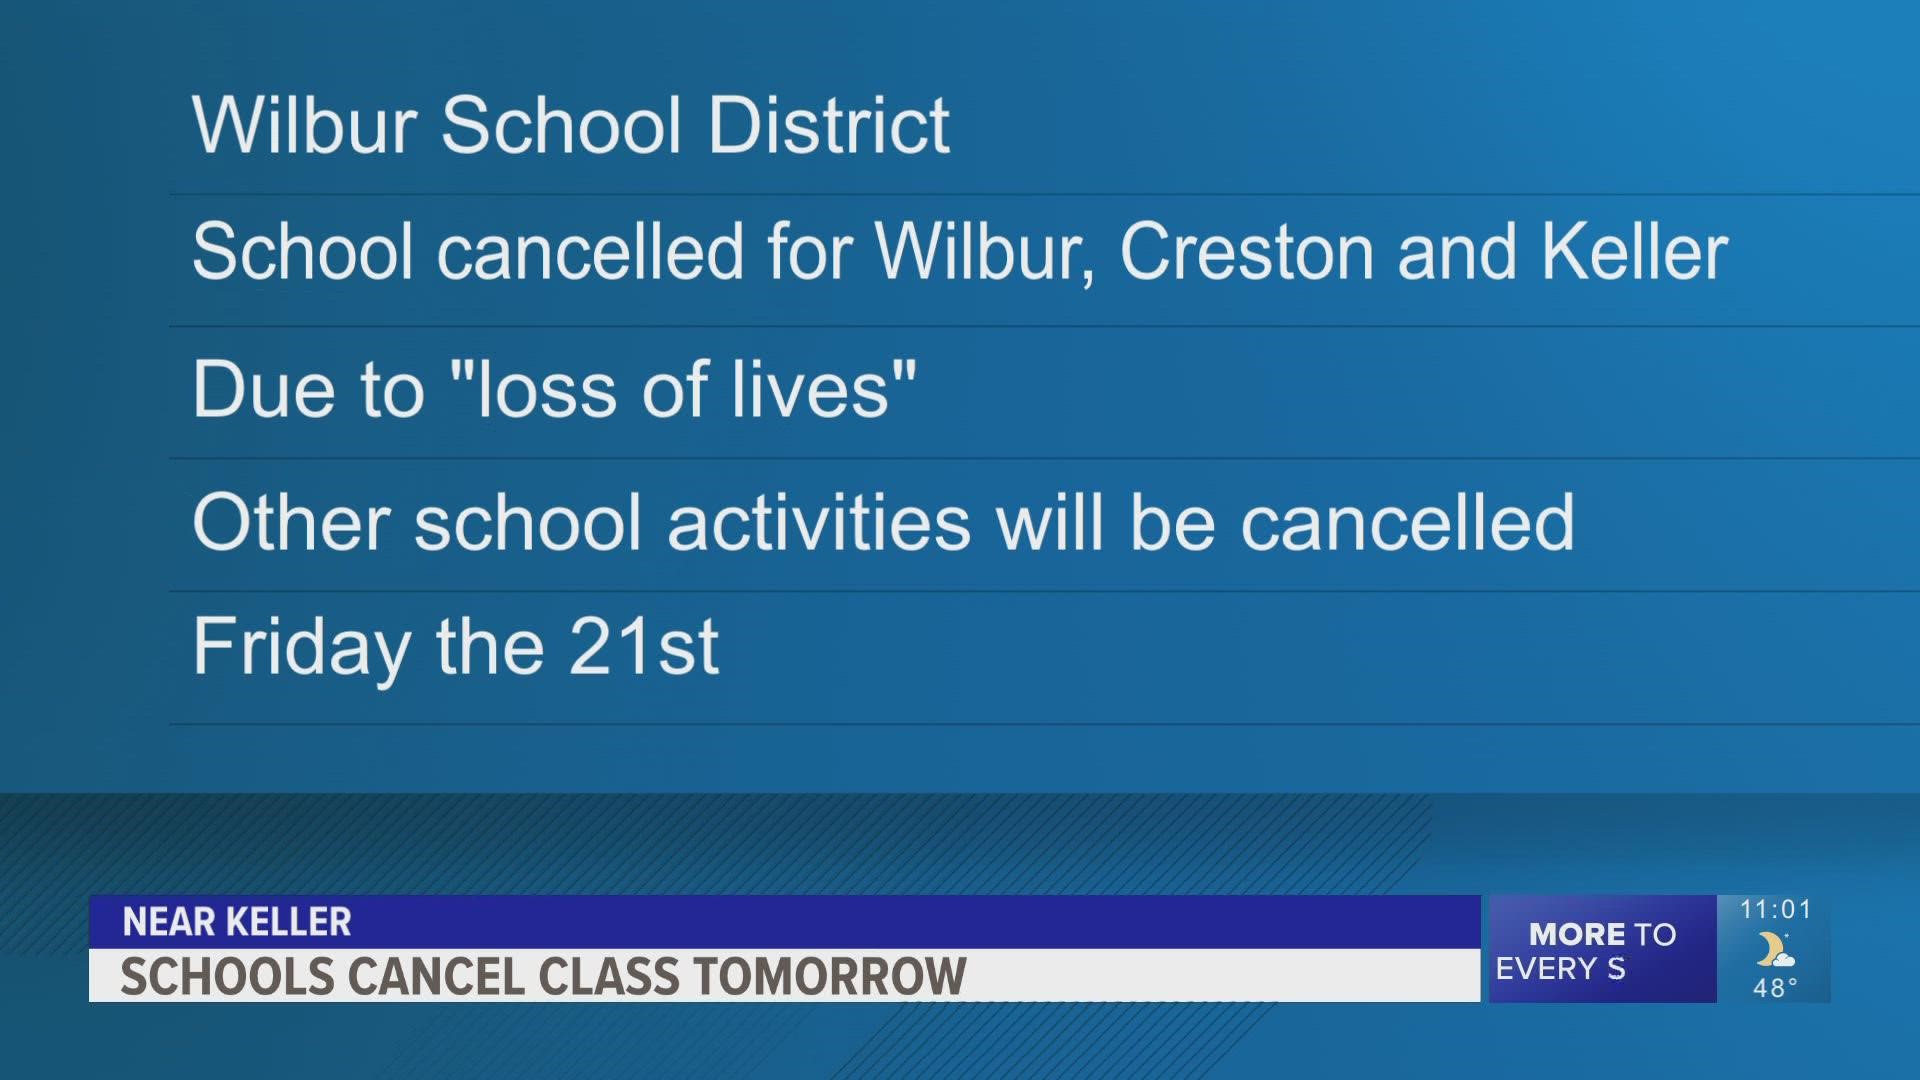 According to a message from Wilbur-Creston School District, a tragedy in the Keller community involving 'loss of lives' is the reason behind the cancellation.